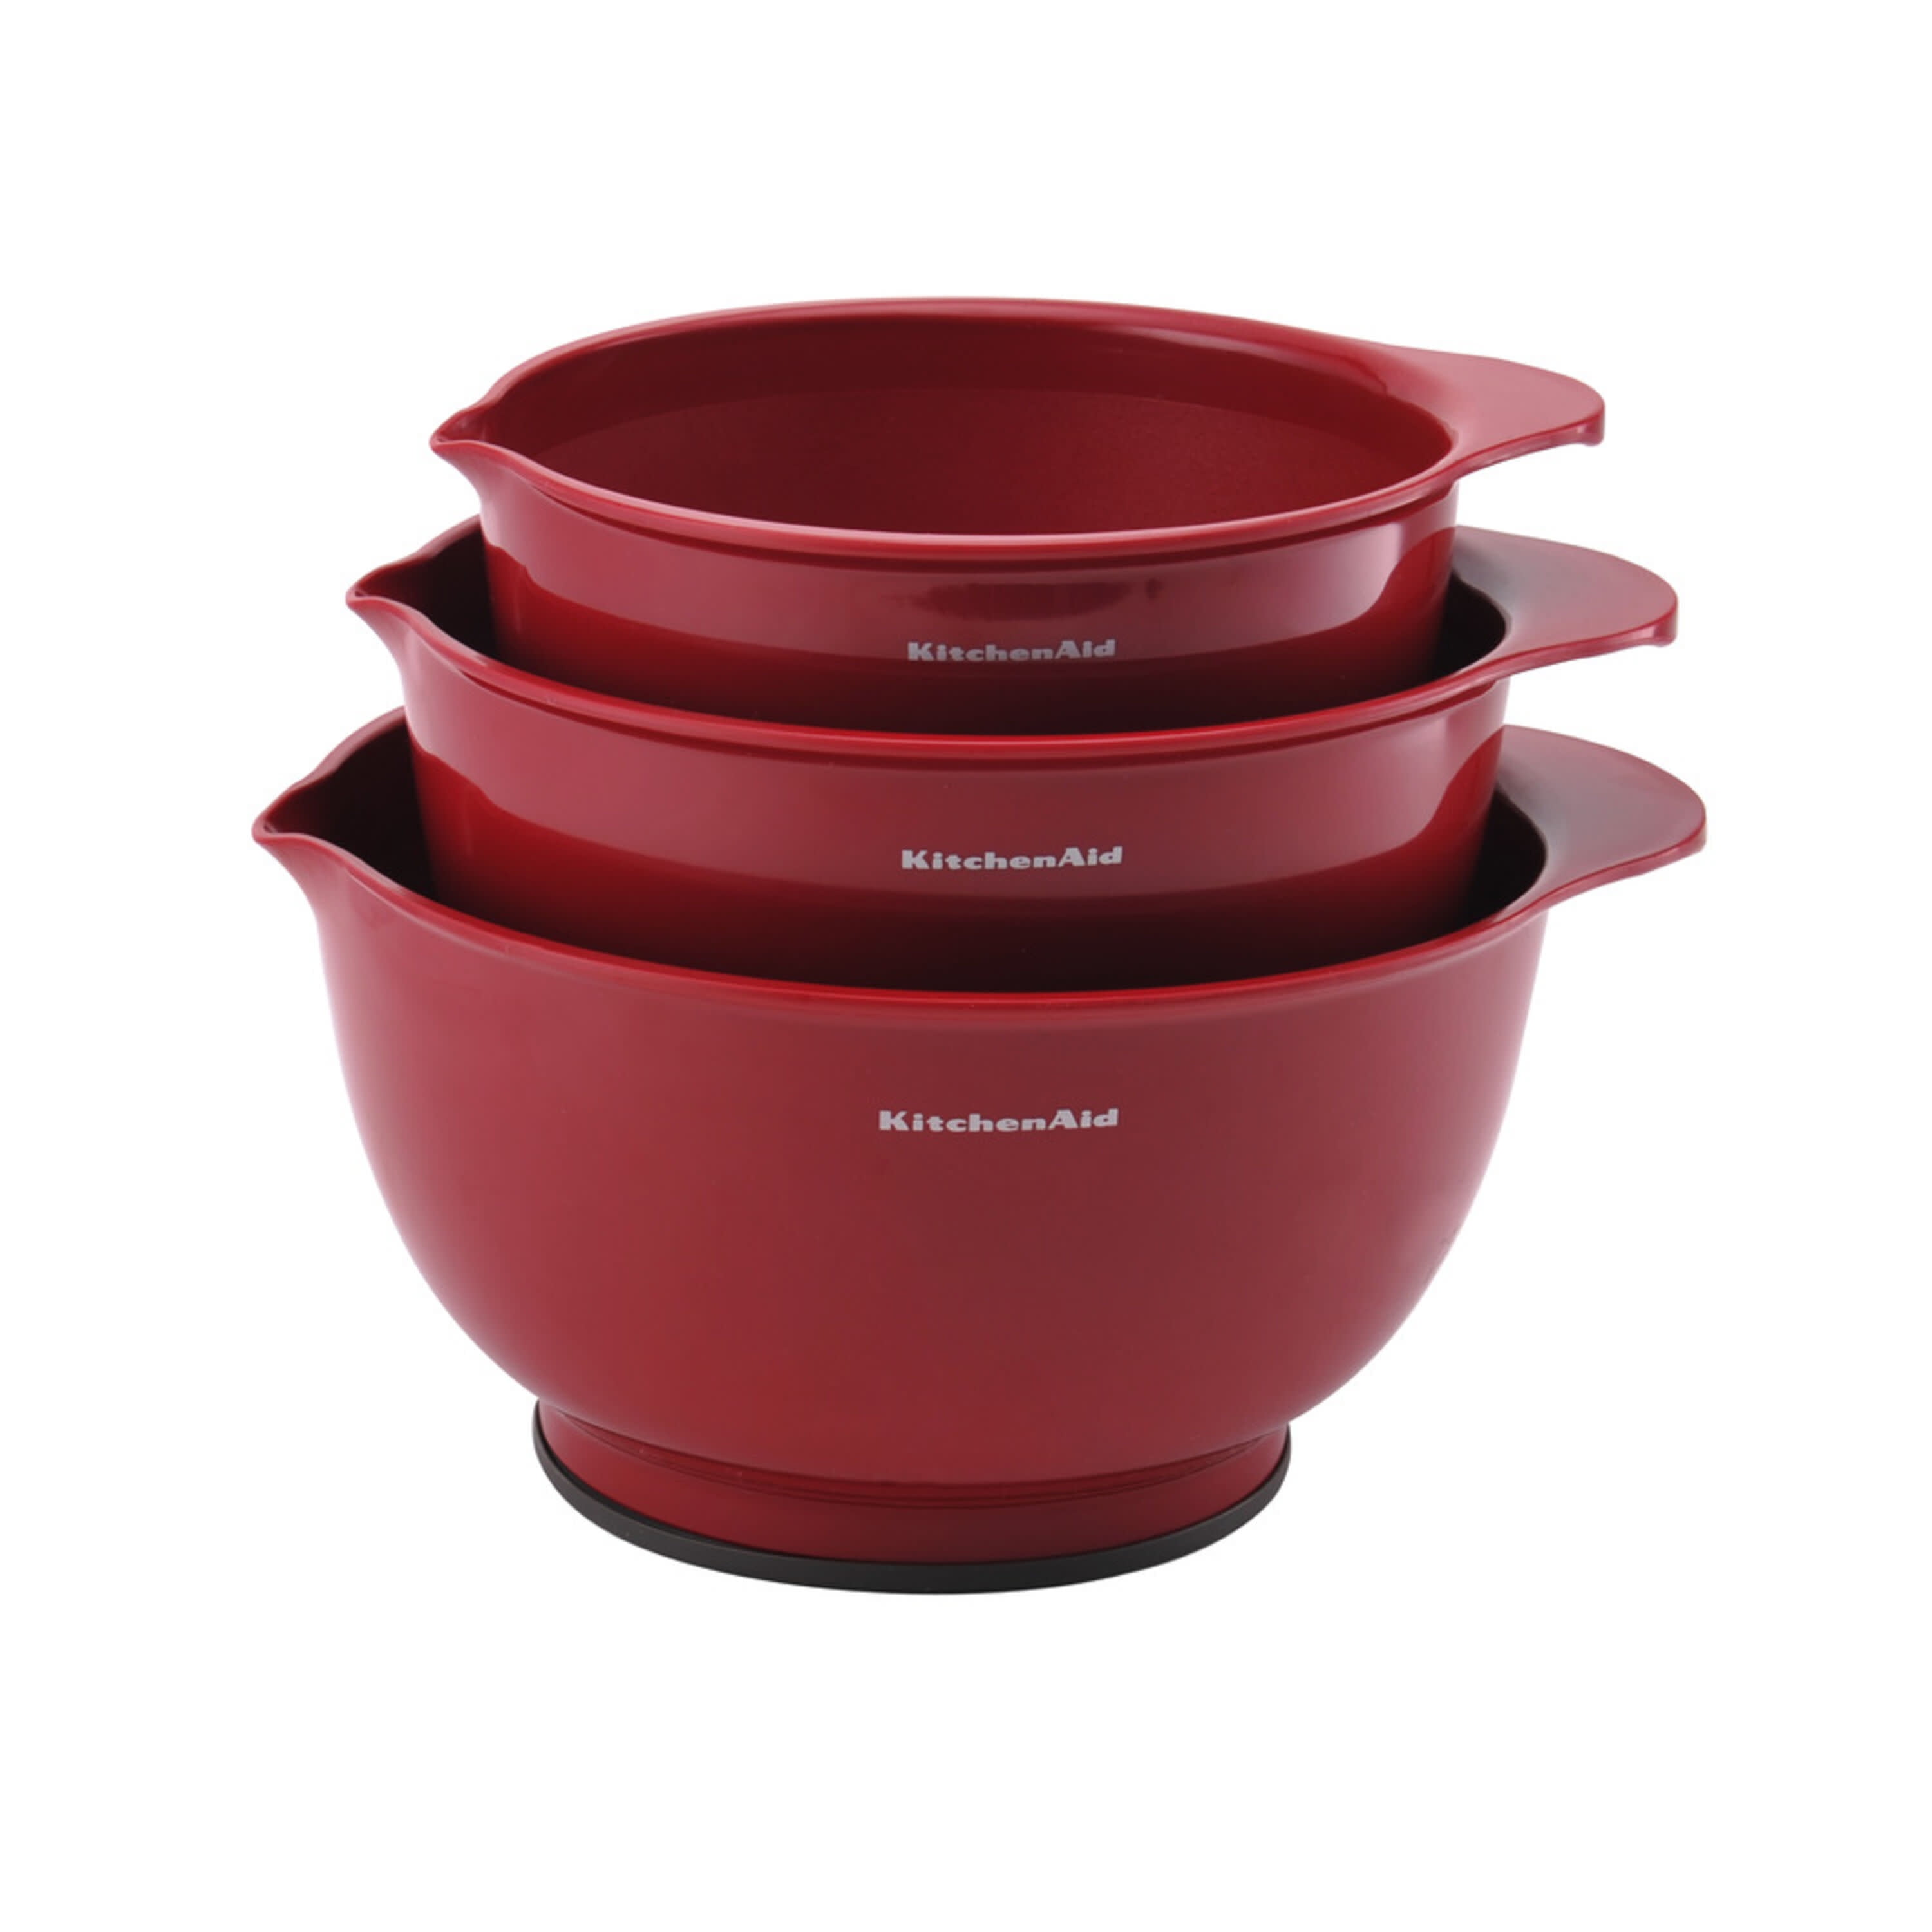 Cuisinart Plastic Set of 3 BPA-free Mixing Bowls, Multicolored